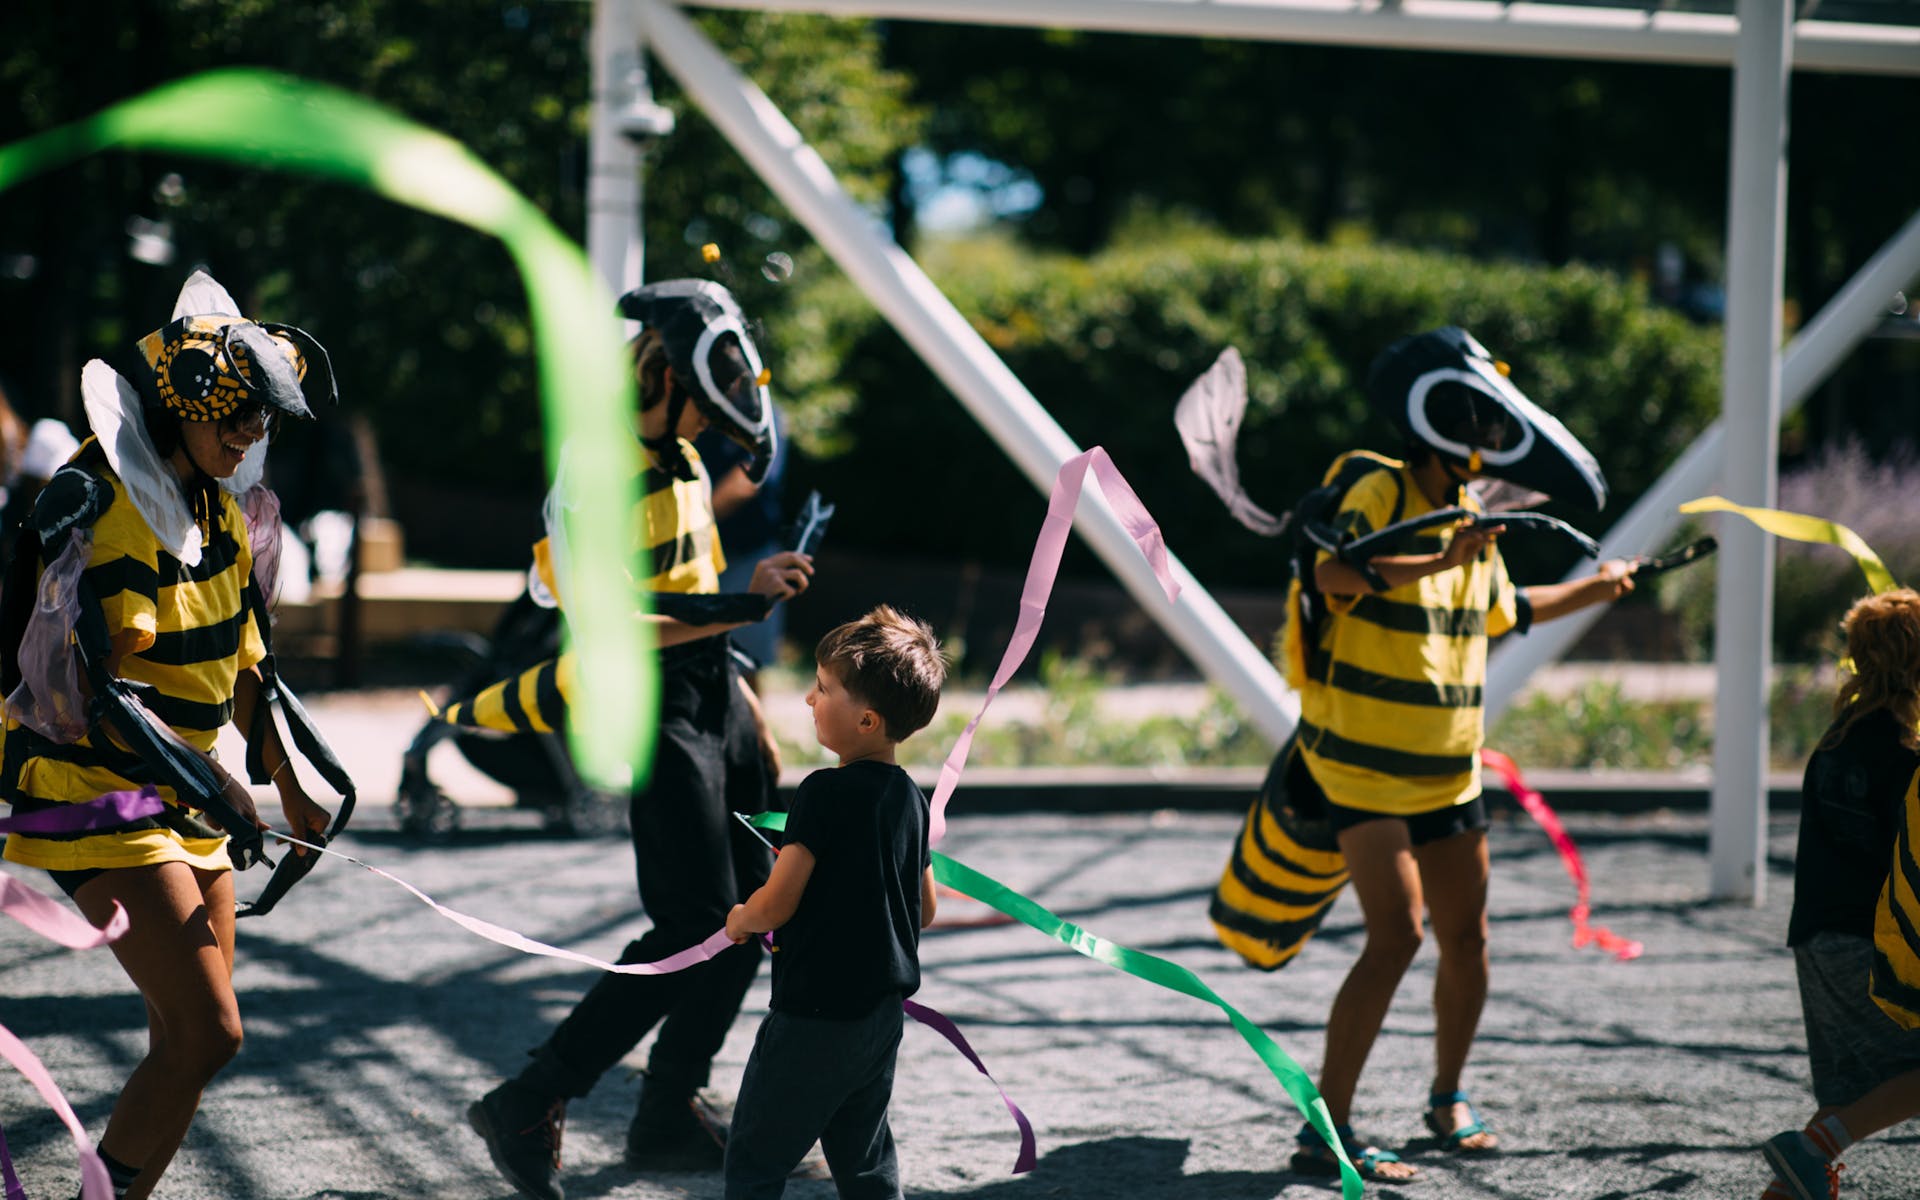 A child dances with two adults in bee costumes among streamers outside.